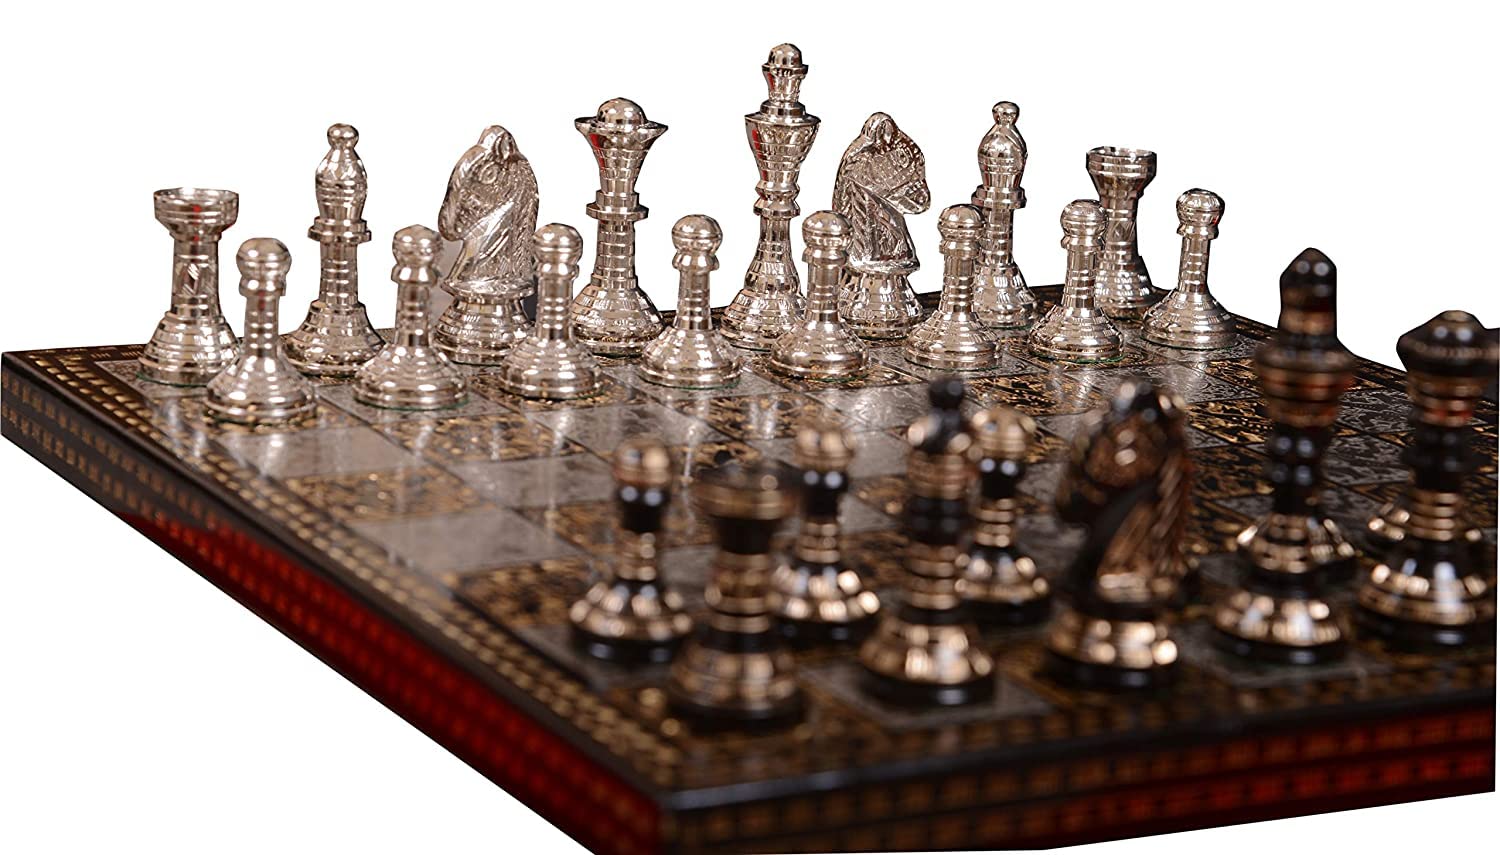 Shyam Antique Creation Collectible Premium Luxury Solid Metal Brass Chess Set for Adults Sets - Board Game Pieces 14Inx14In, Set, Silver & Black, 14X14X5 Inches